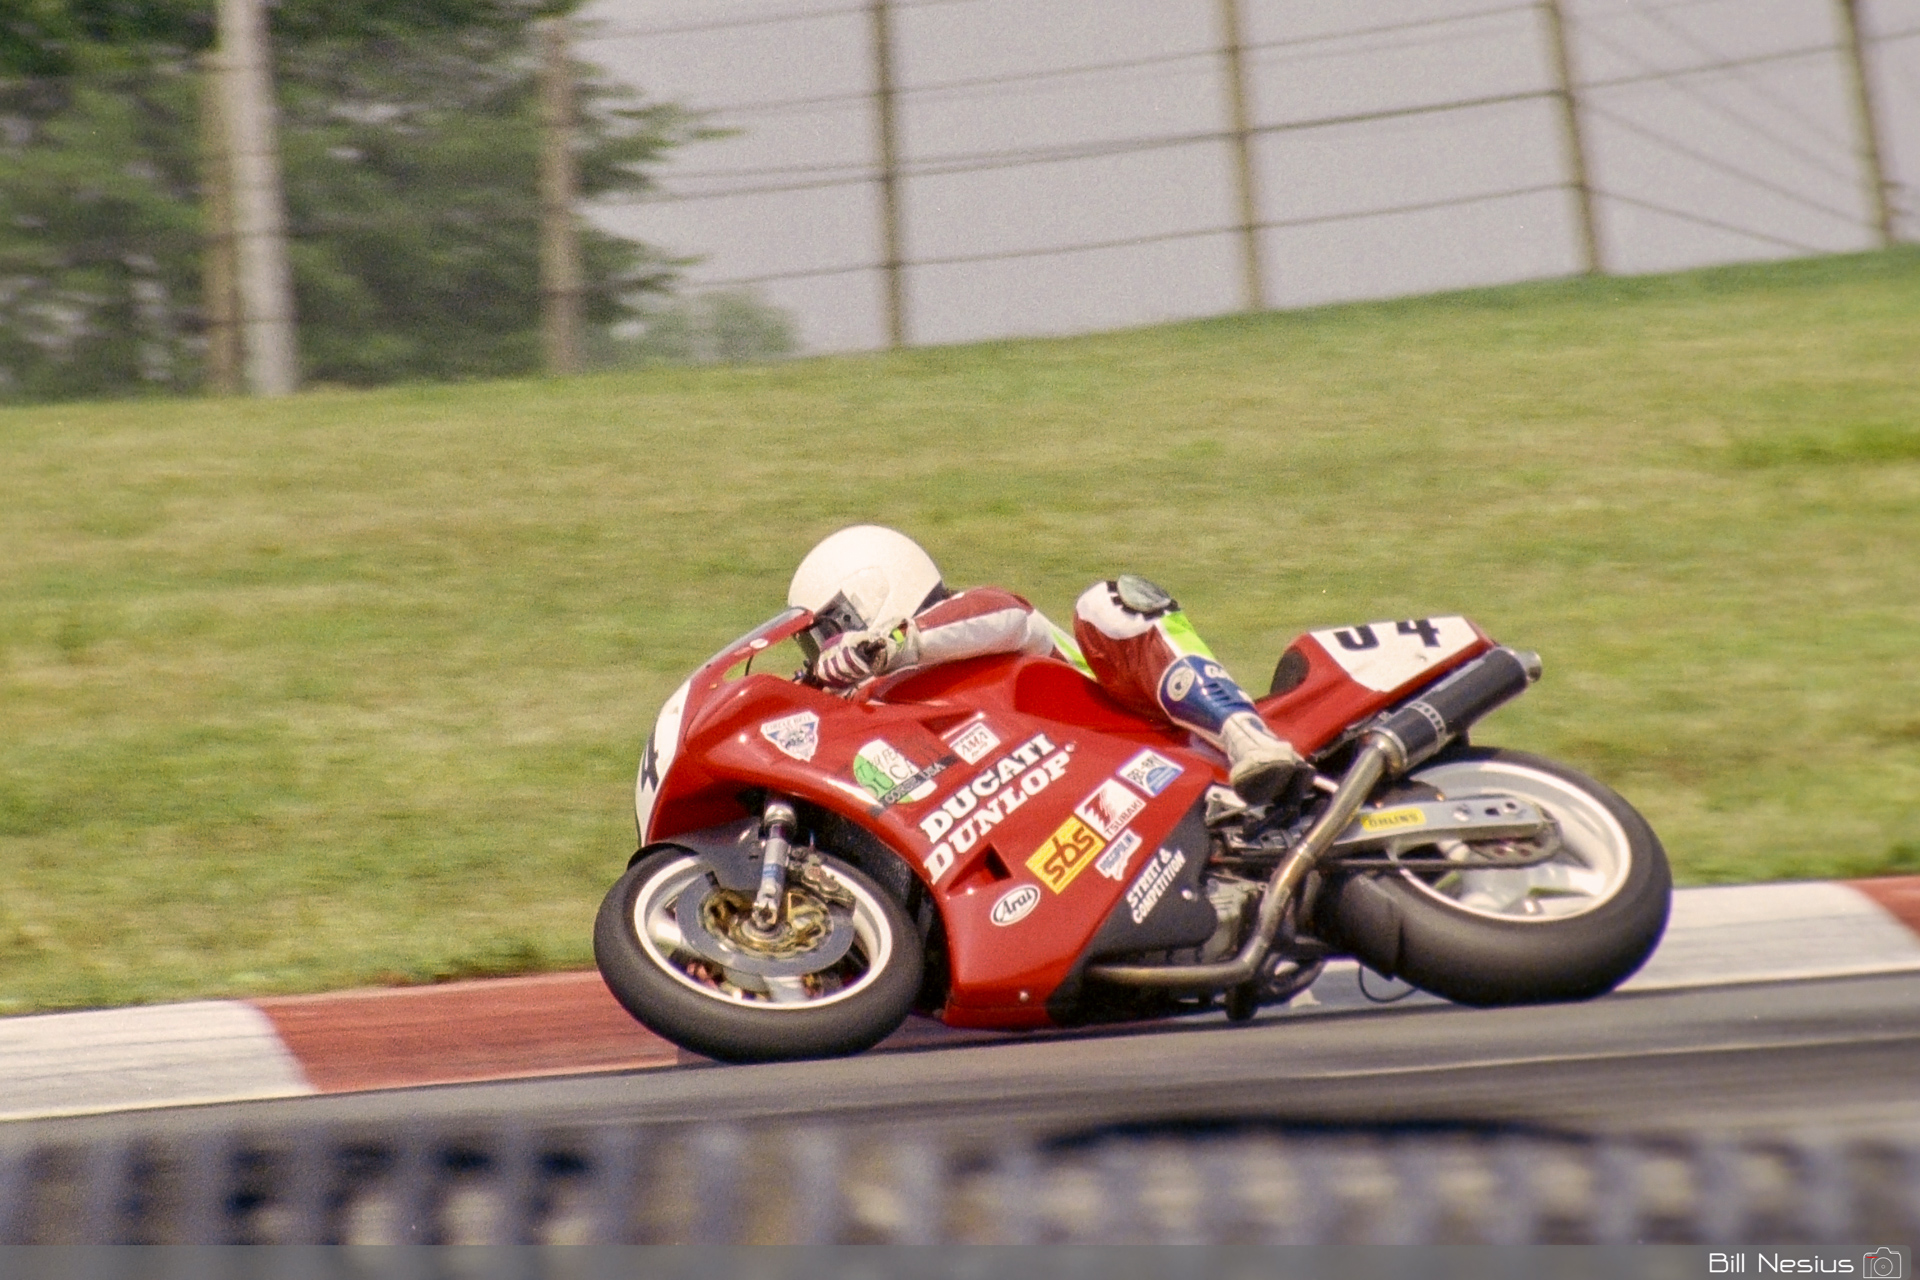 Pascal Picotte on the Number 34 Fast by Ferracci Ducati 851 / FLM_7781 / 2